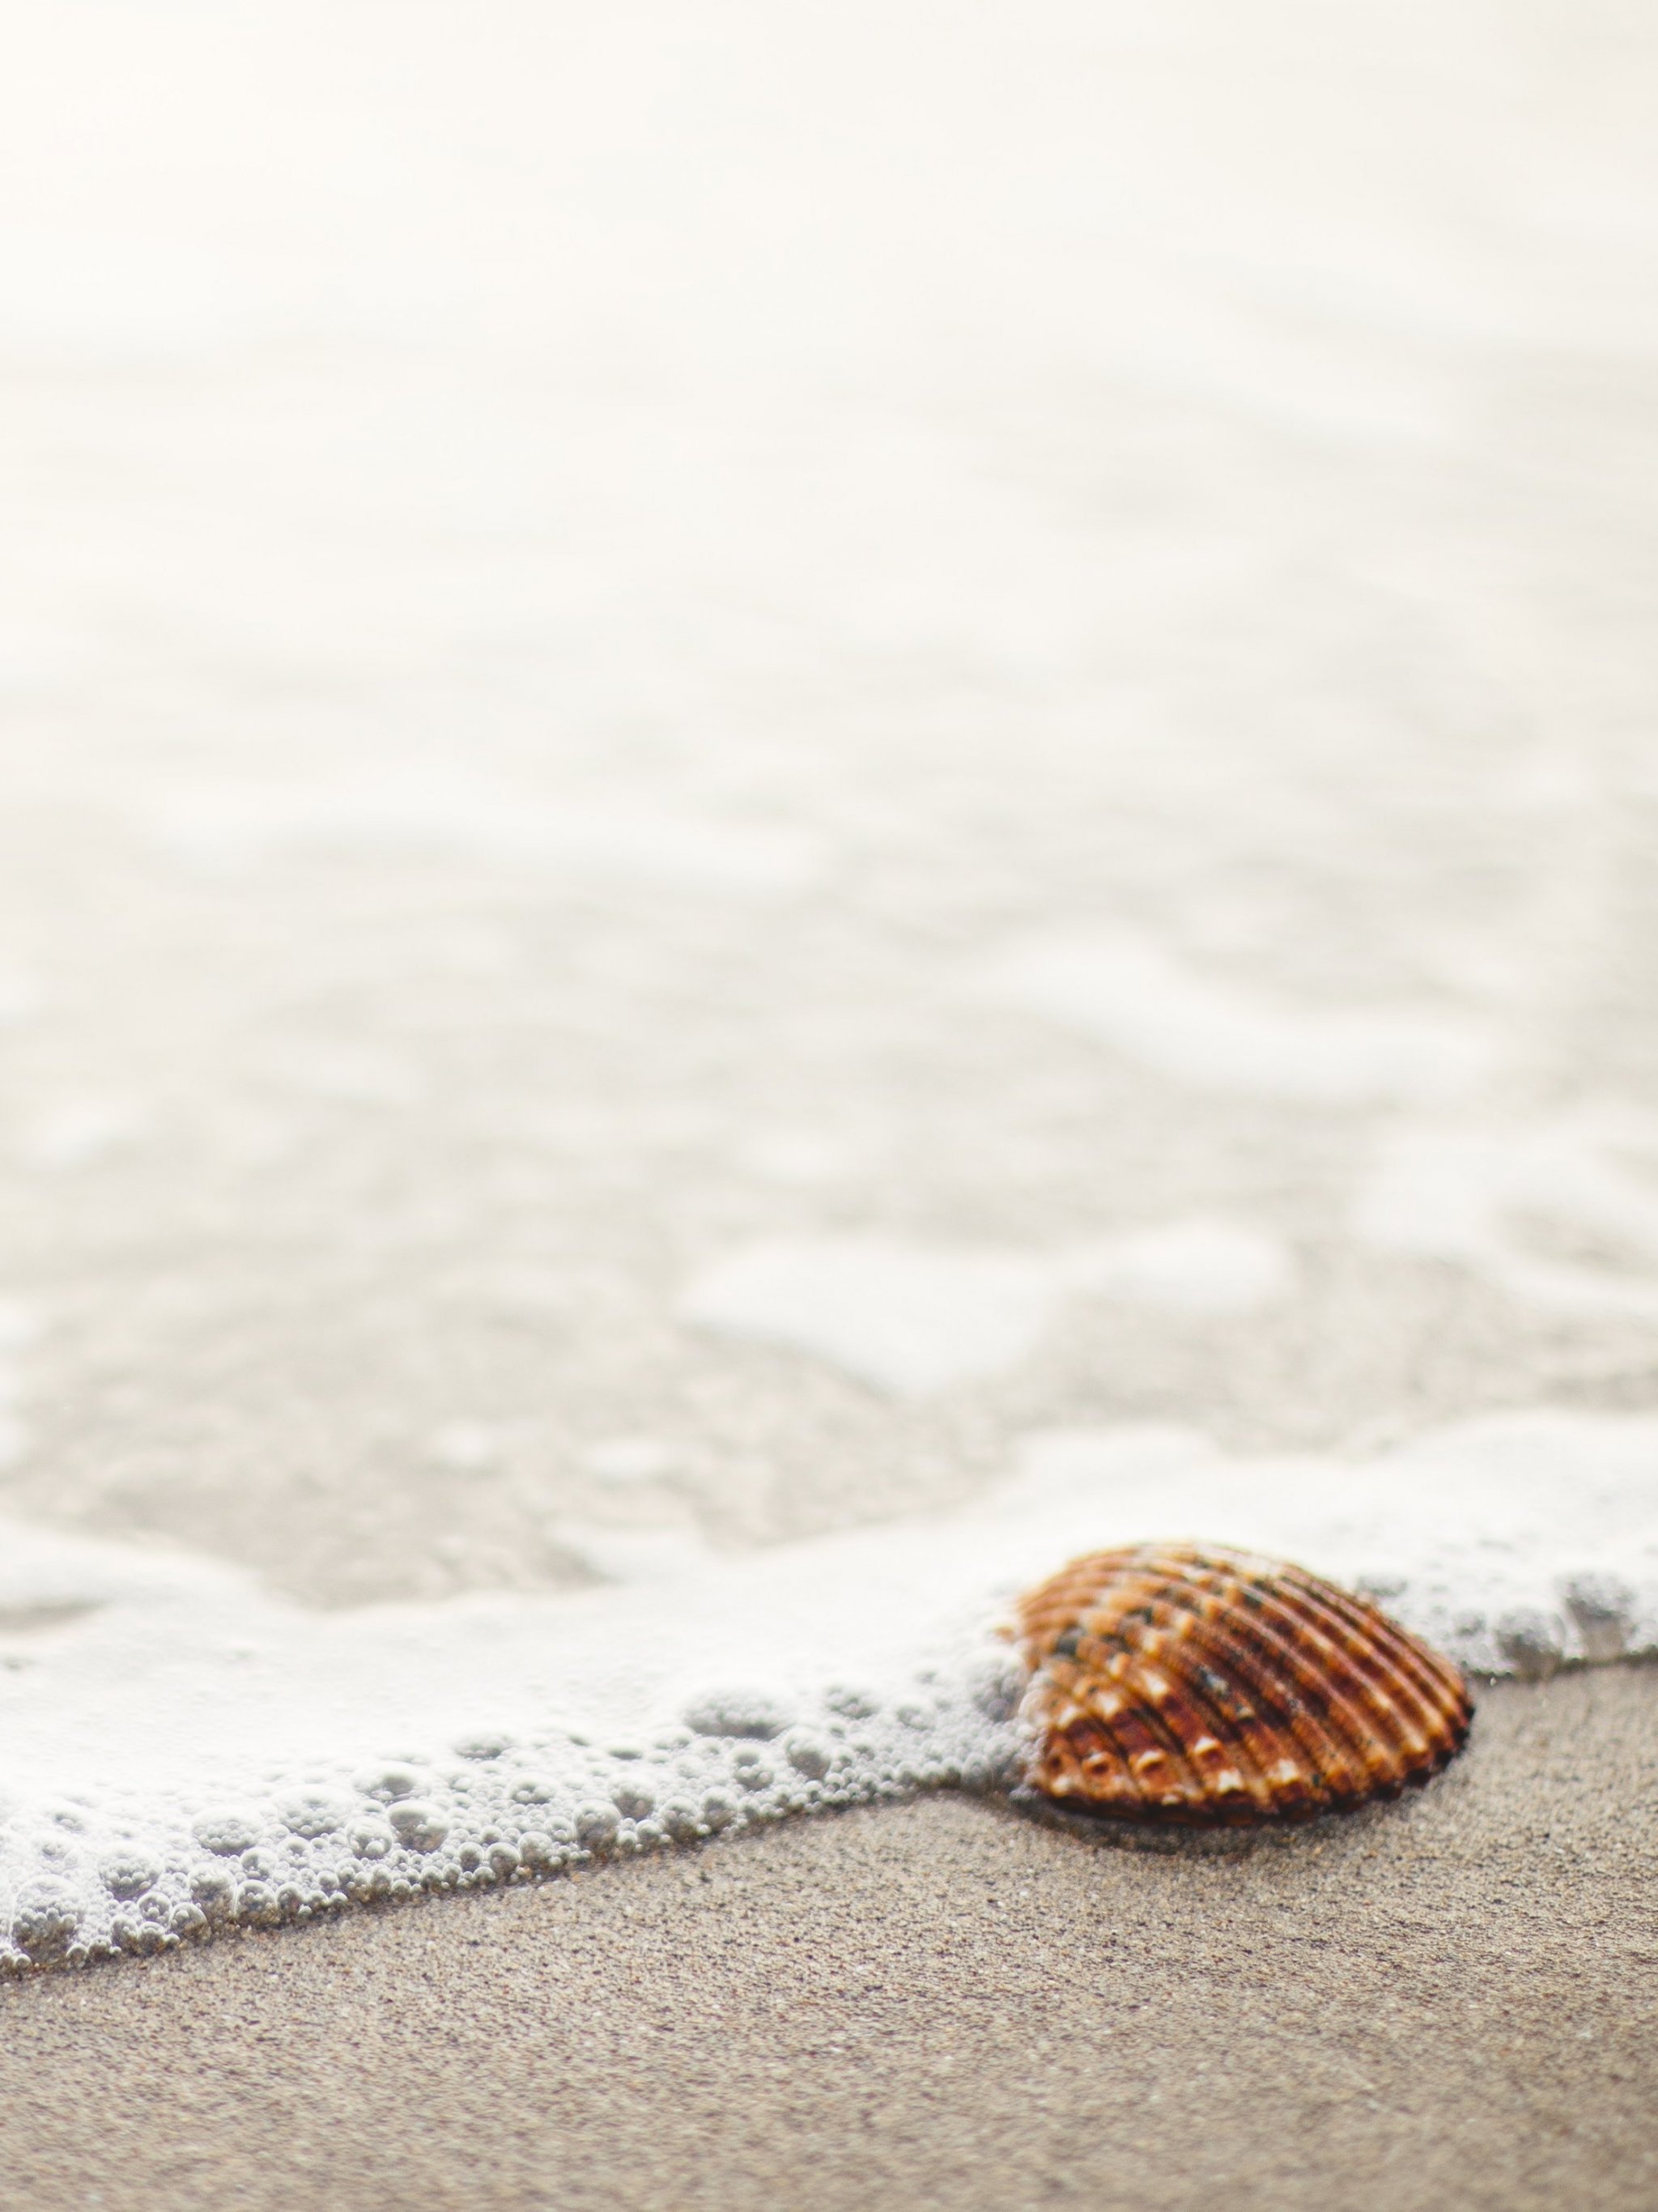 Shell on Beach Wallpaper - iPhone, Android & Desktop Backgrounds